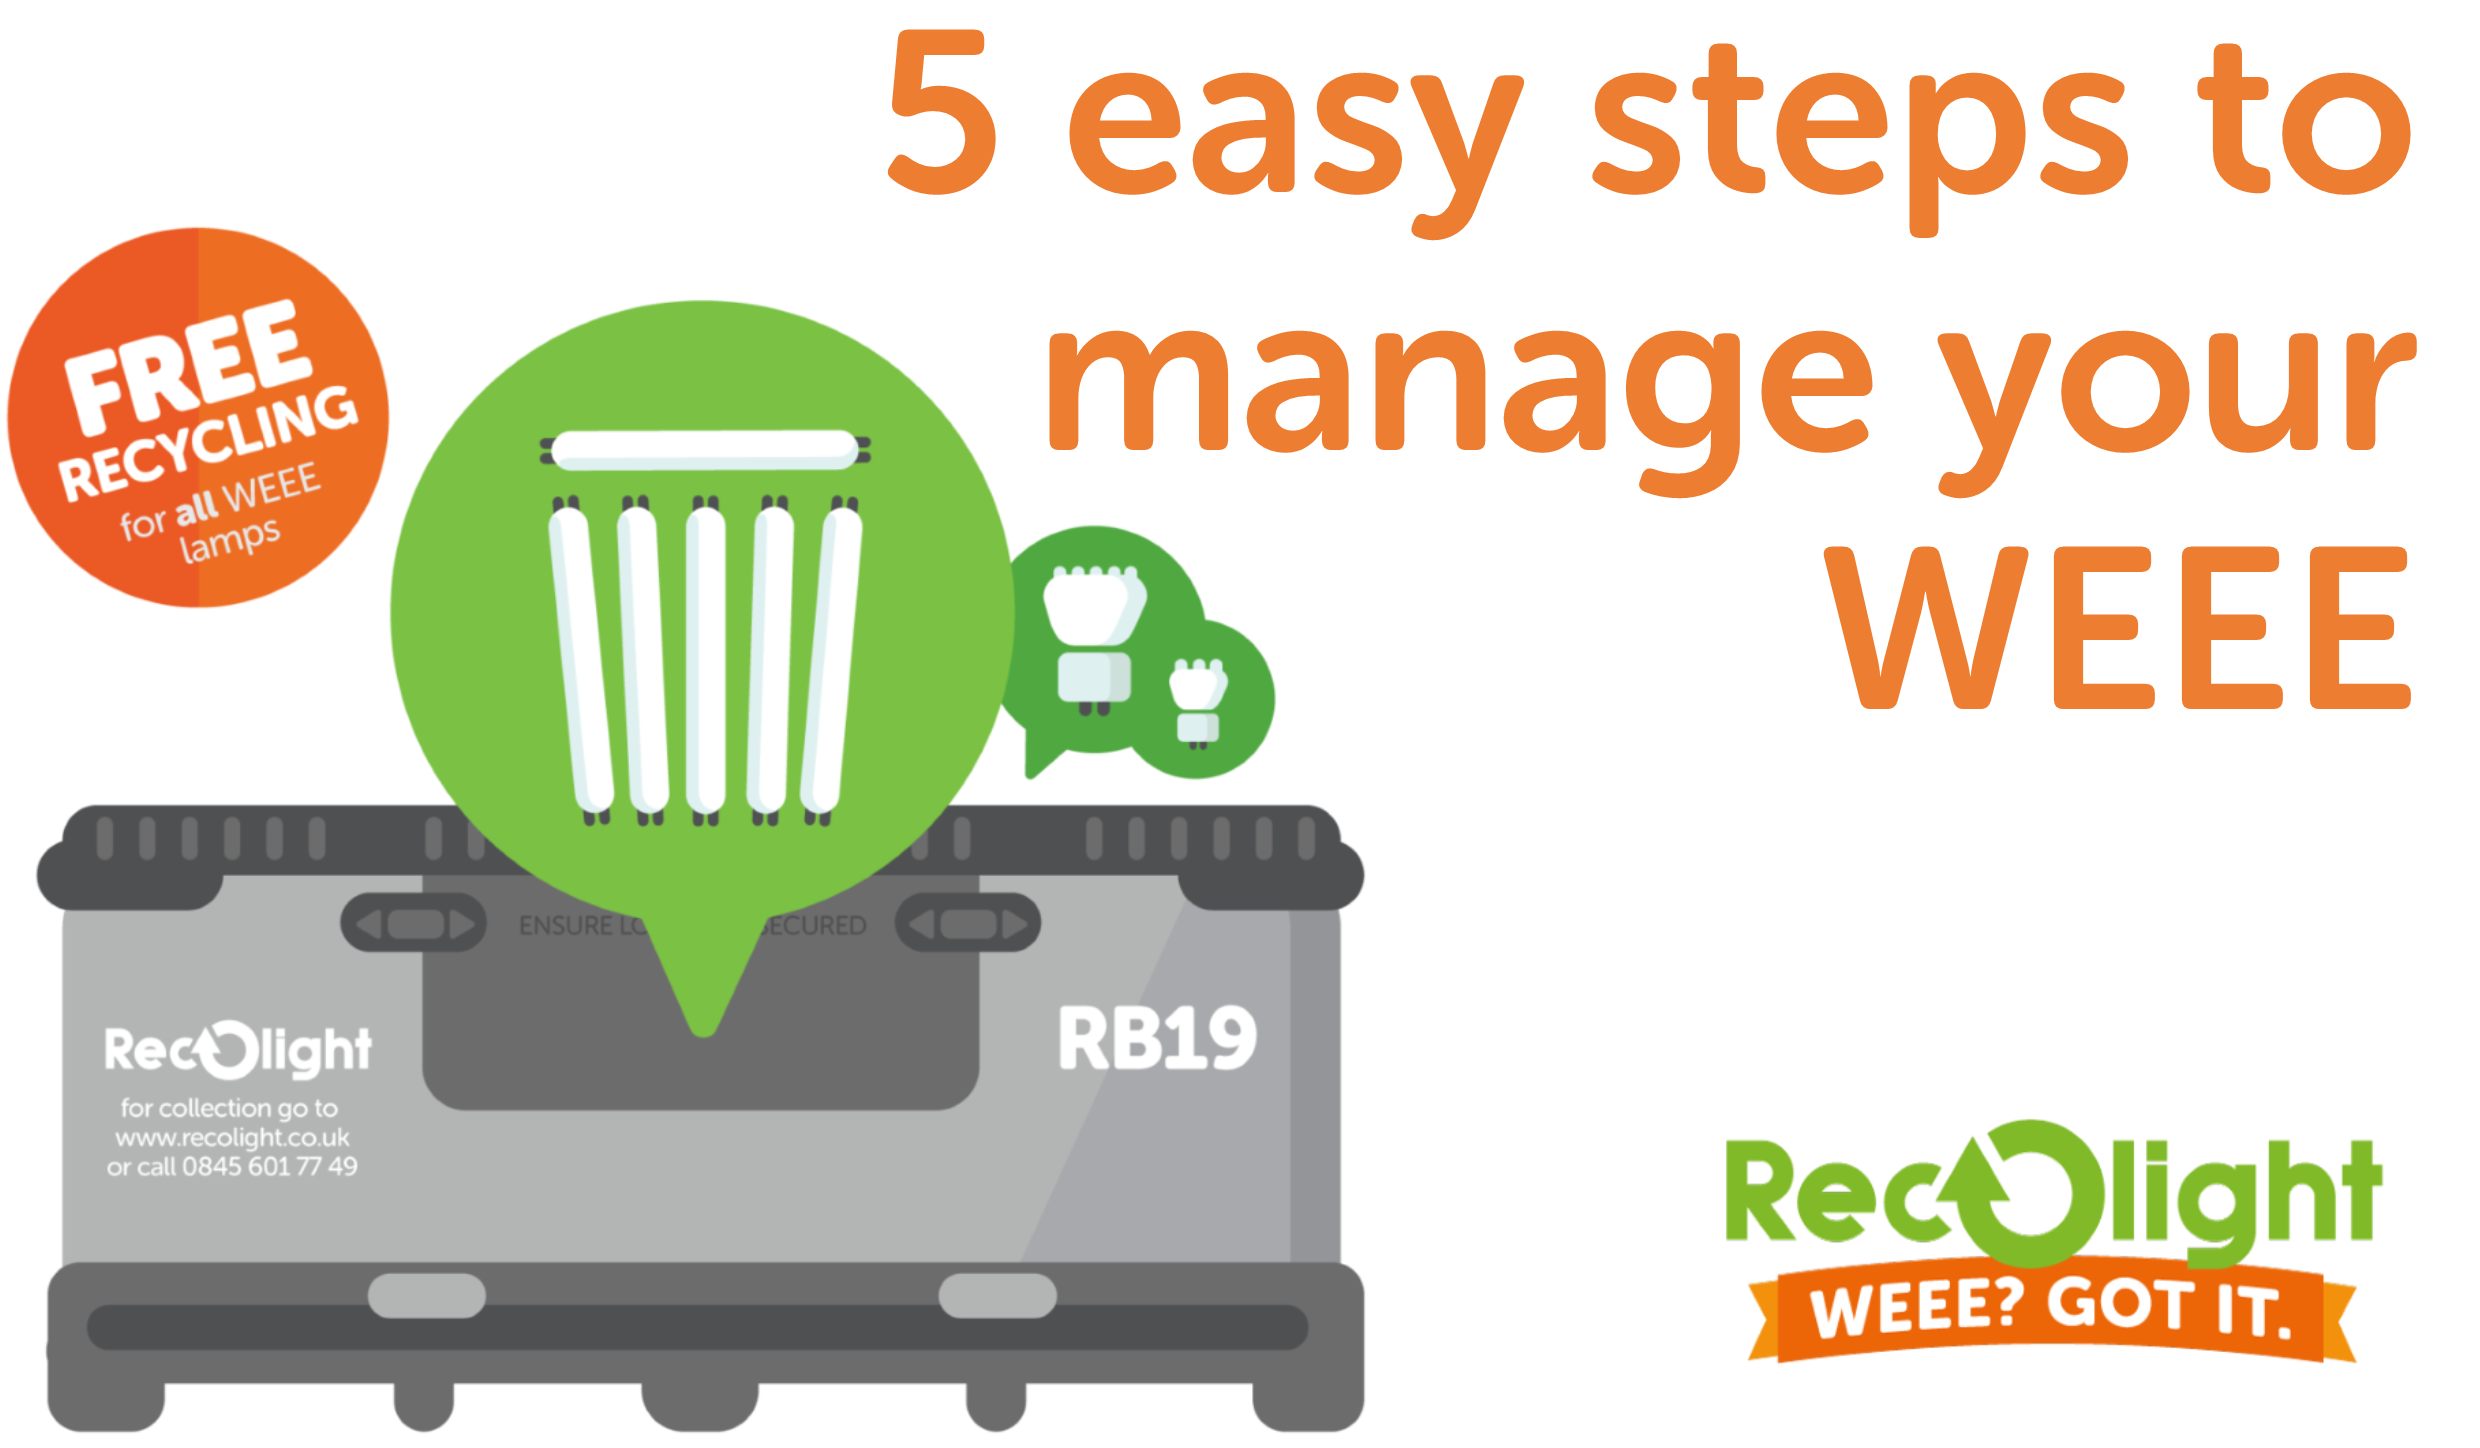 5 easy steps to manage your WEEE